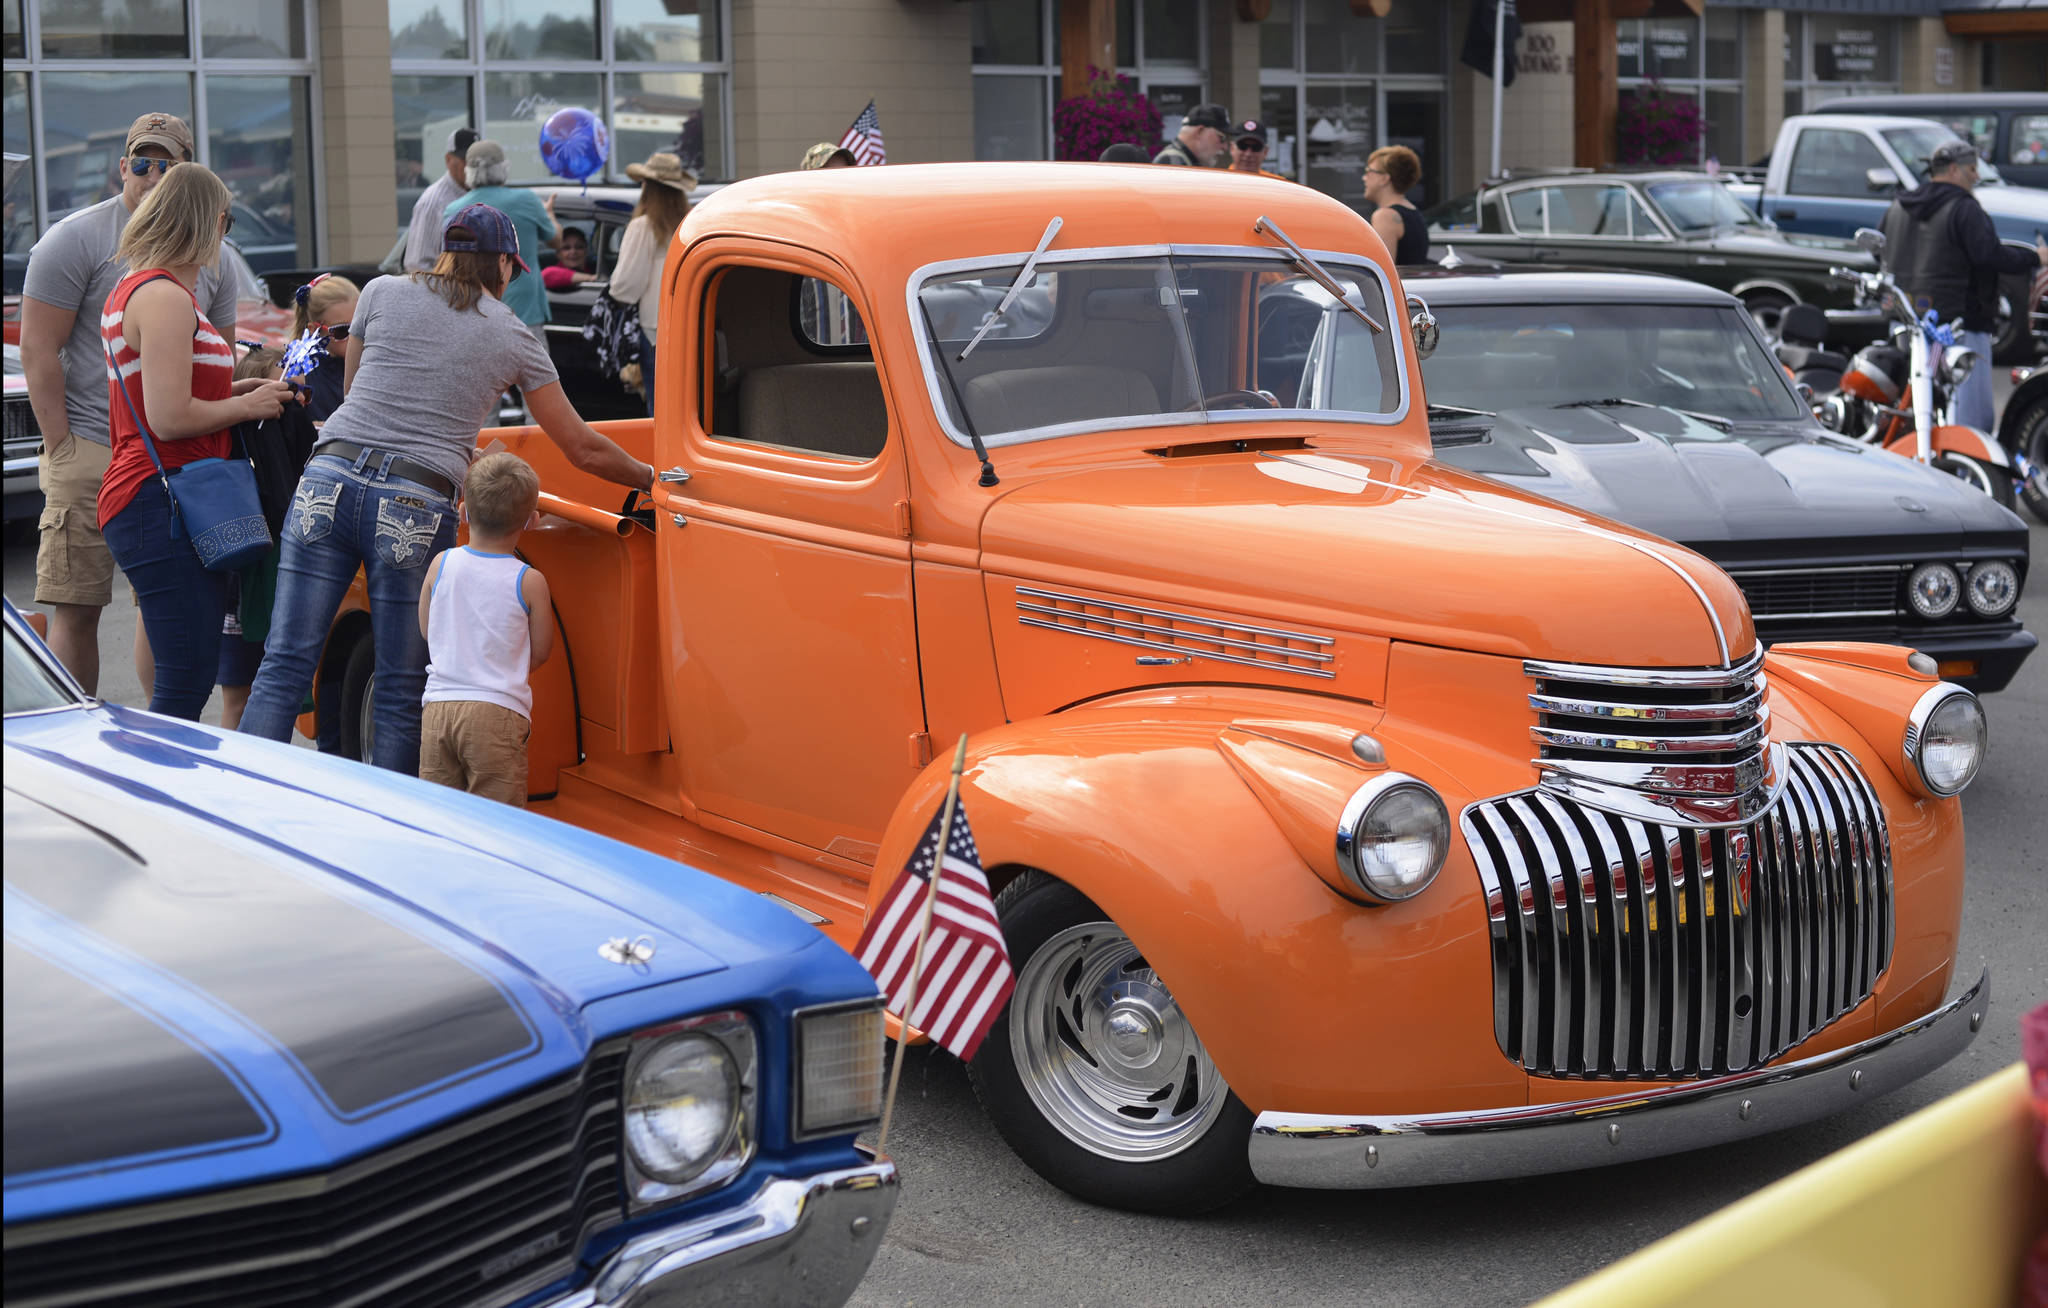 Vintage vehicles owned by members of the Kaknu Kruzers Car Club gather before Kenai’s Fourth of July parade on Wednesday, July 4, 2018 in Kenai, Alaska. (Ben Boettger/Peninsula Clarion)